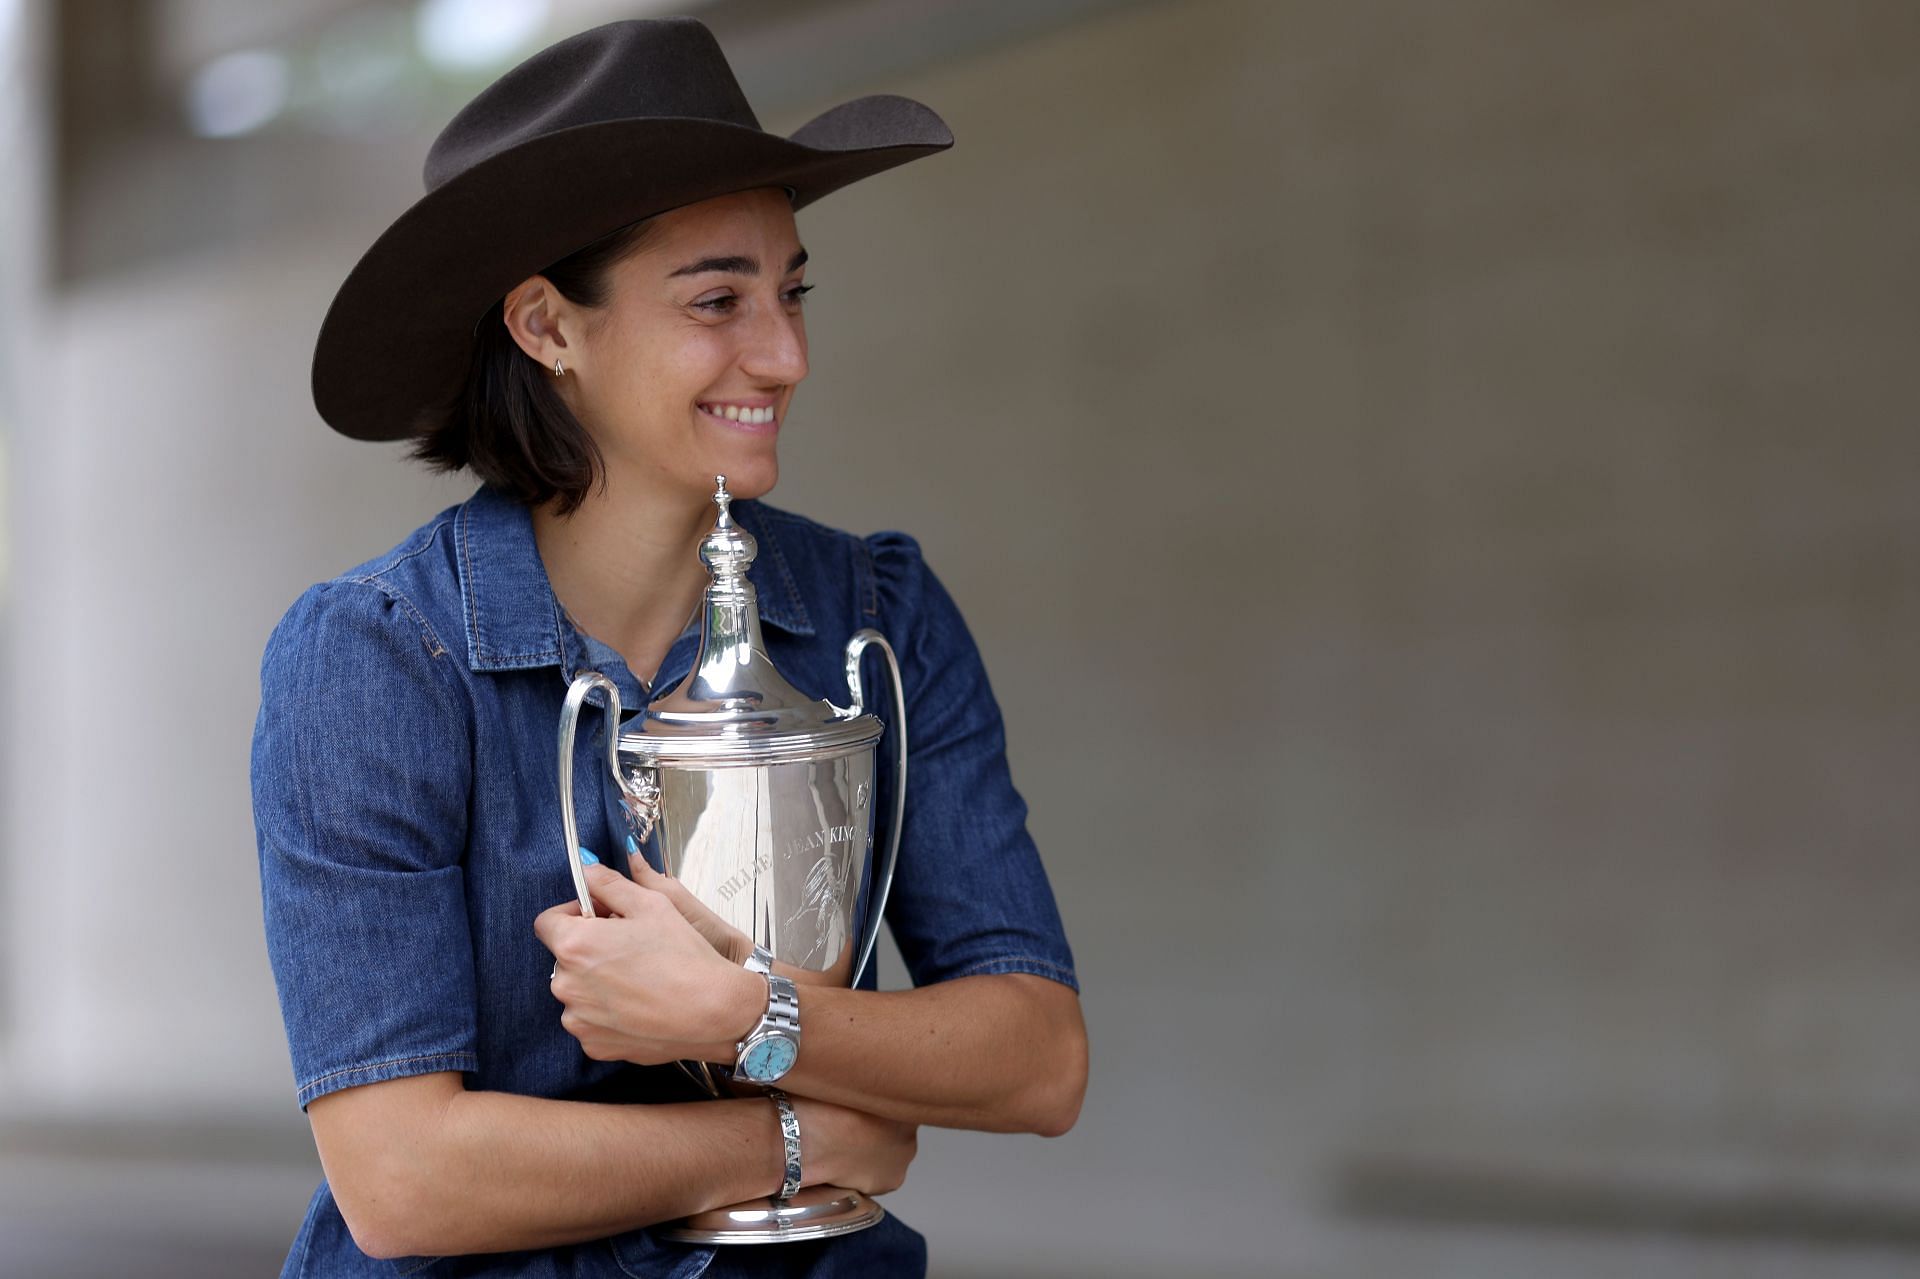 Caroline Garcia lifted the biggest trophy of her career at the 2022 WTA Finals Fort Worth